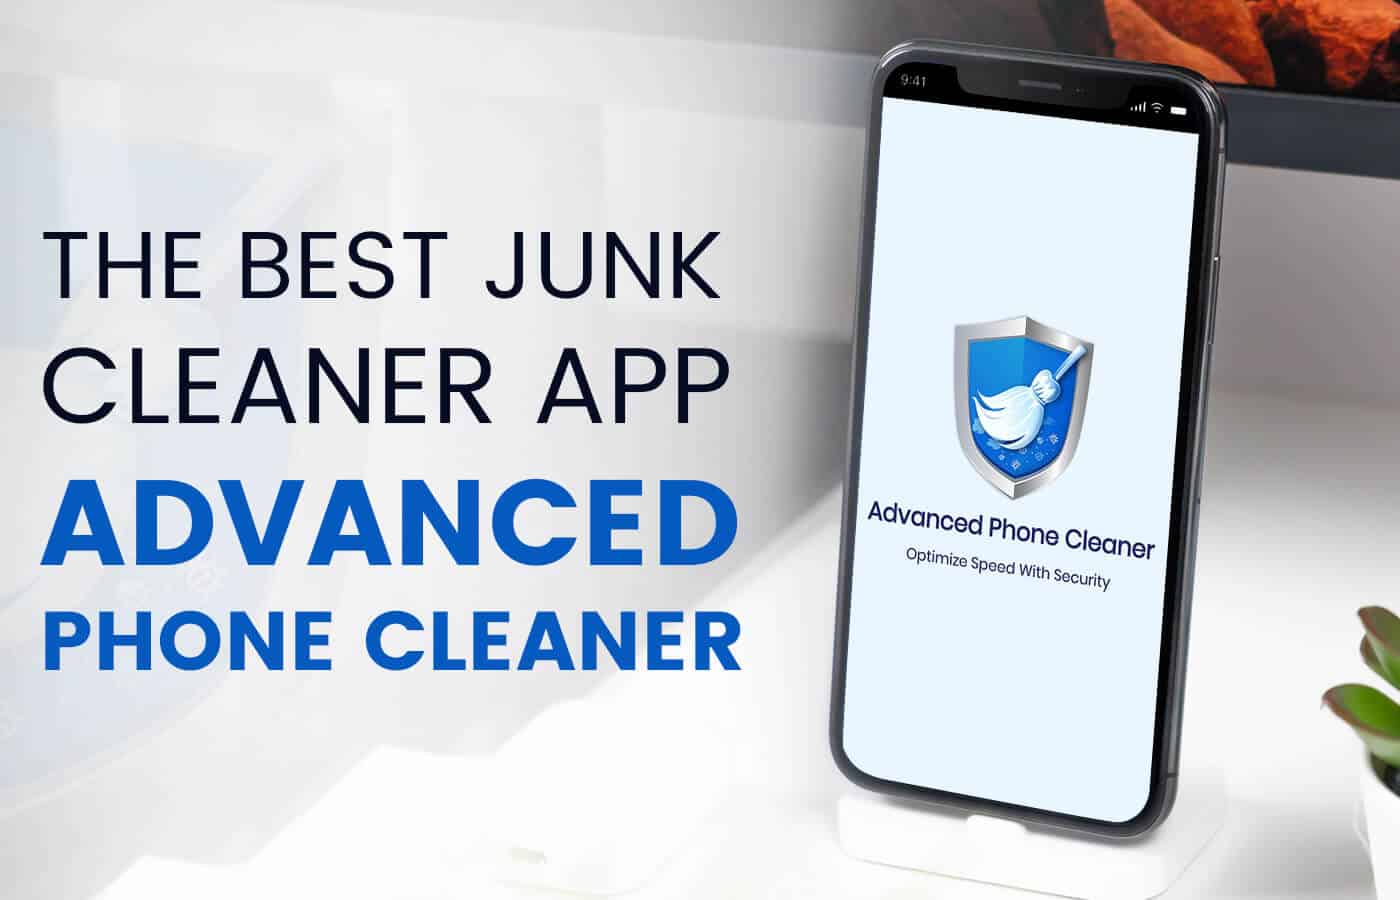 reviews on quick cleaner and junk cleaner apps